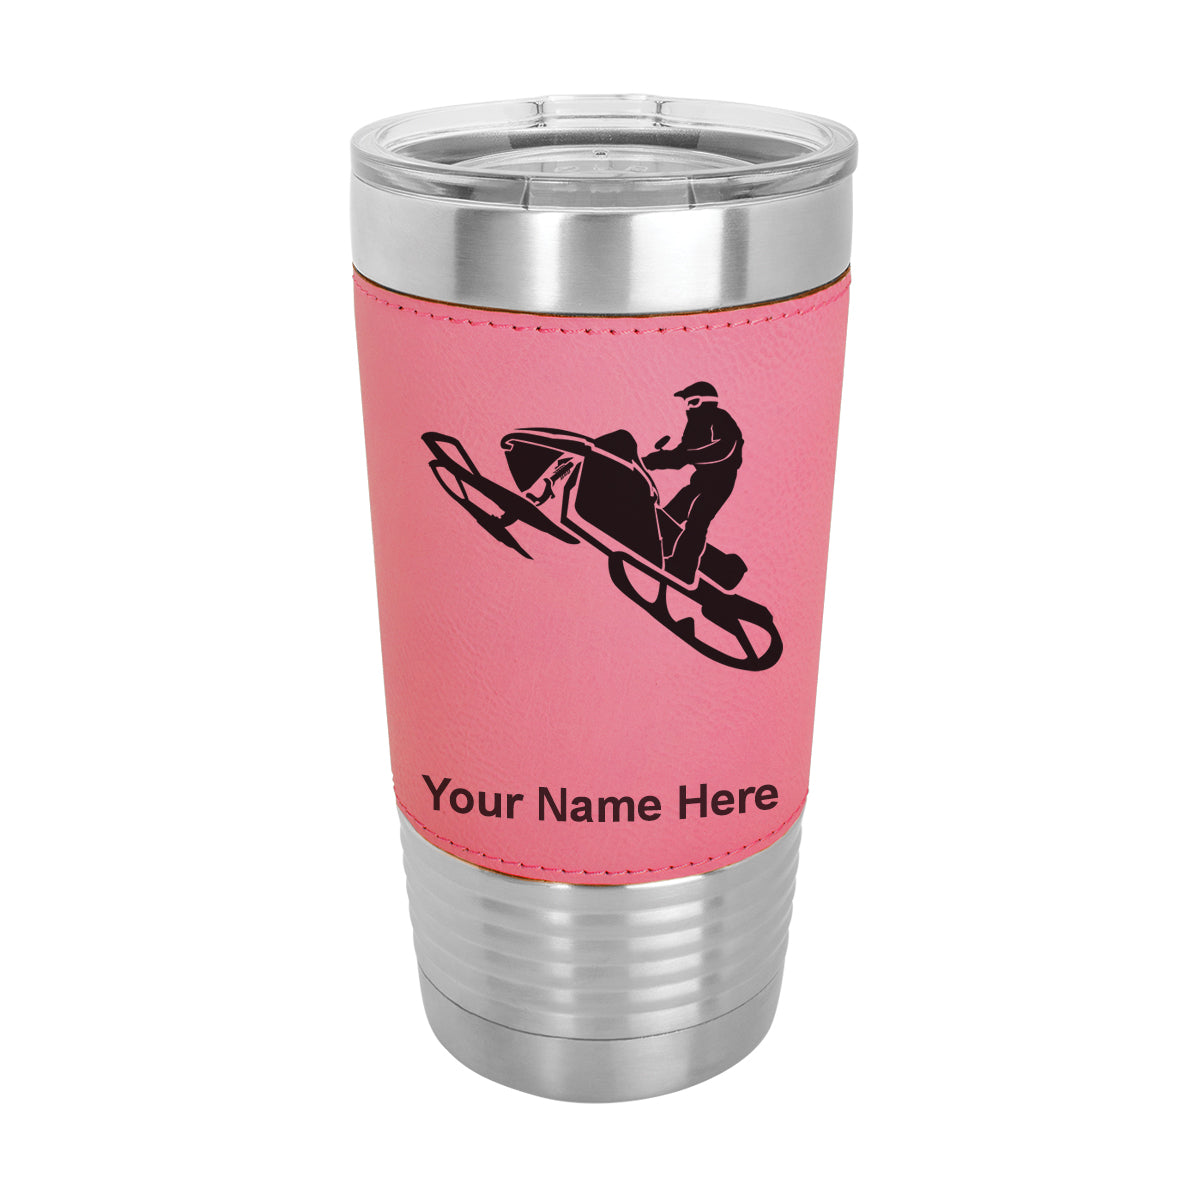 20oz Faux Leather Tumbler Mug, Snowmobile, Personalized Engraving Included - LaserGram Custom Engraved Gifts